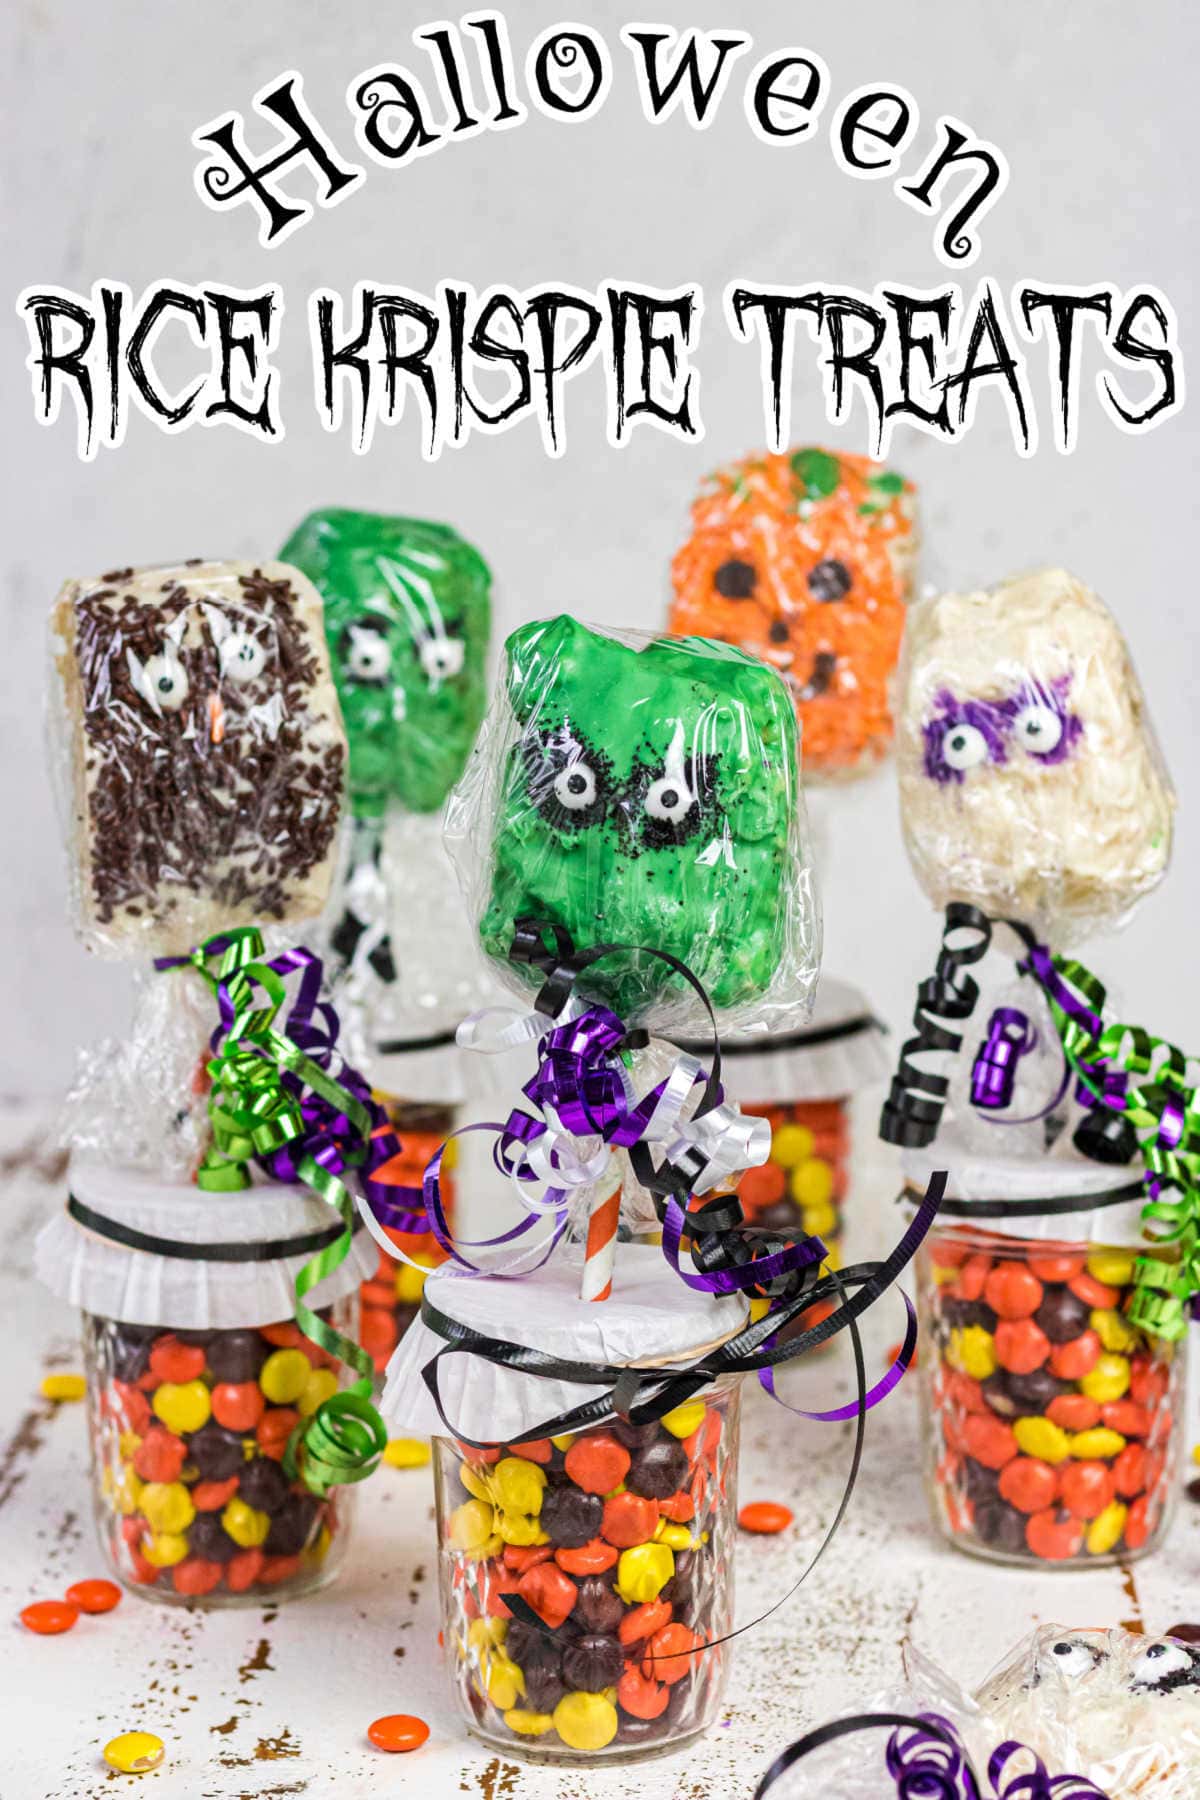 Rice Krispie Treats arranged on a serving table. Title text overlay.